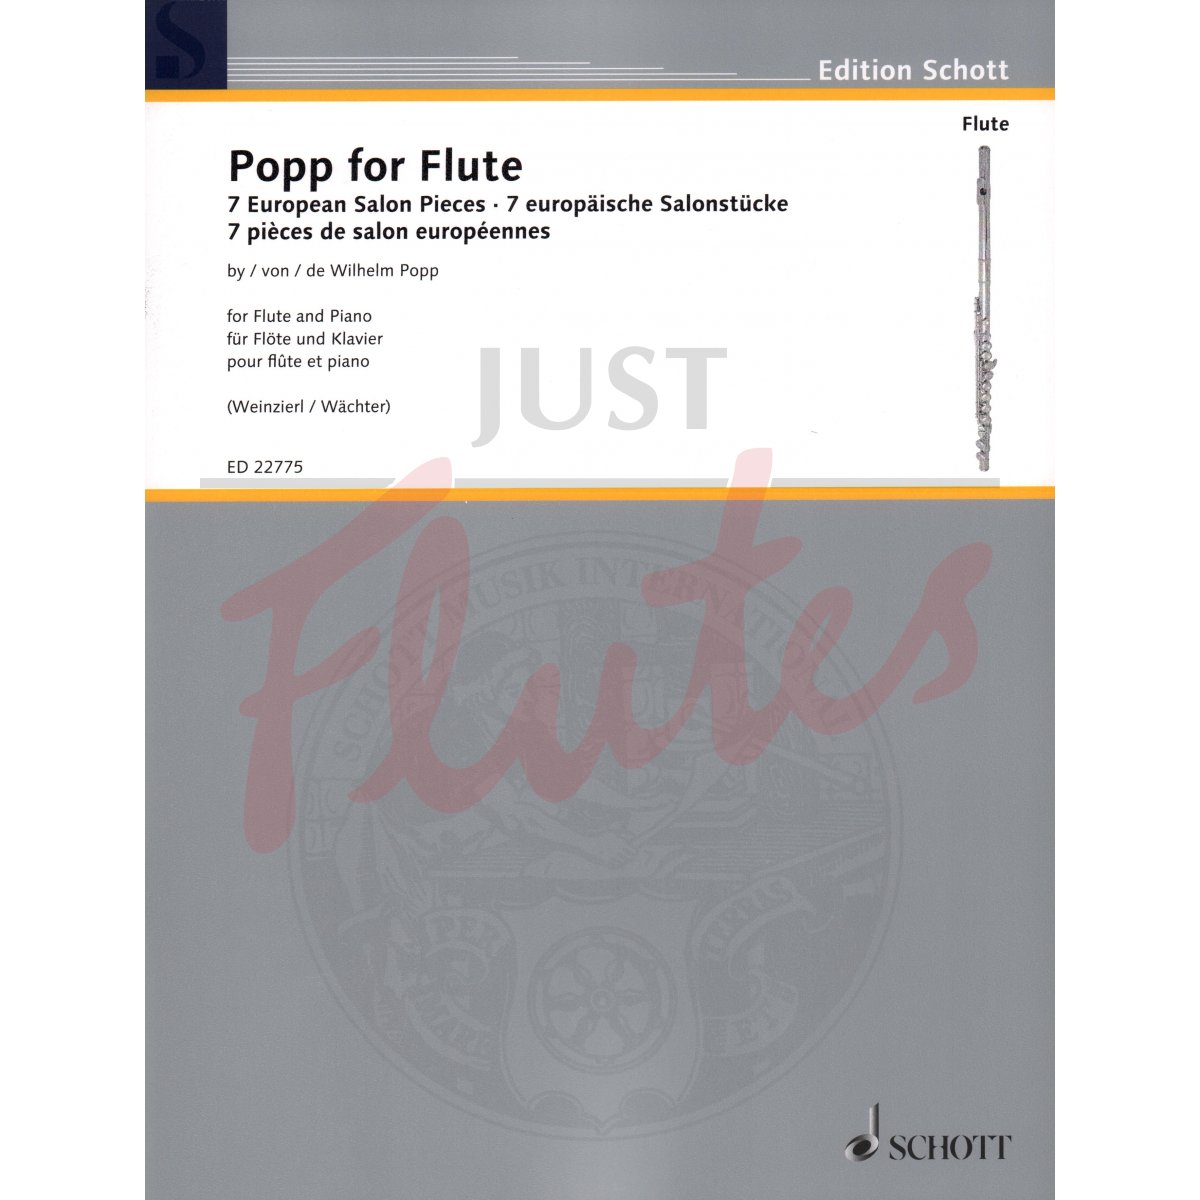 Popp for Flute: 7 European Salon Pieces for Flute and Piano